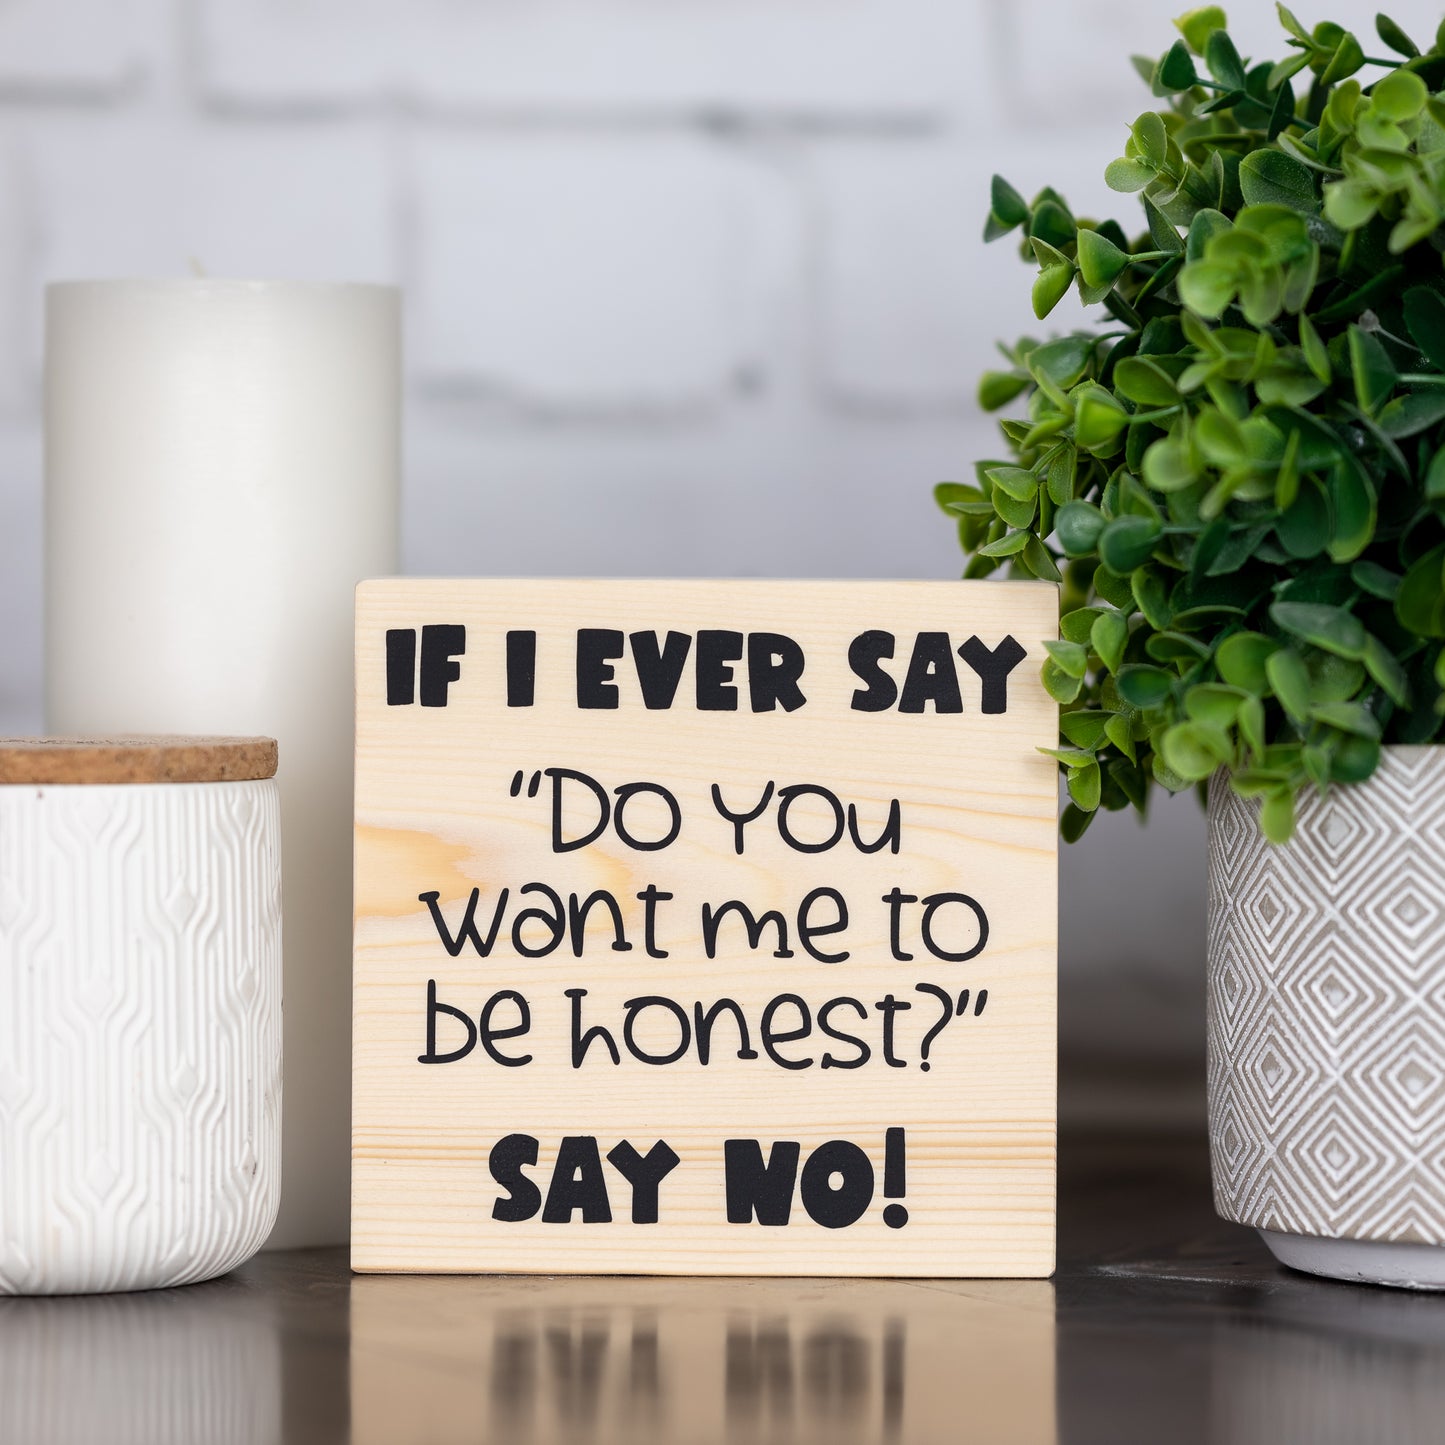 if i ever say "do you want me to be honest?" say no! ~ block sign